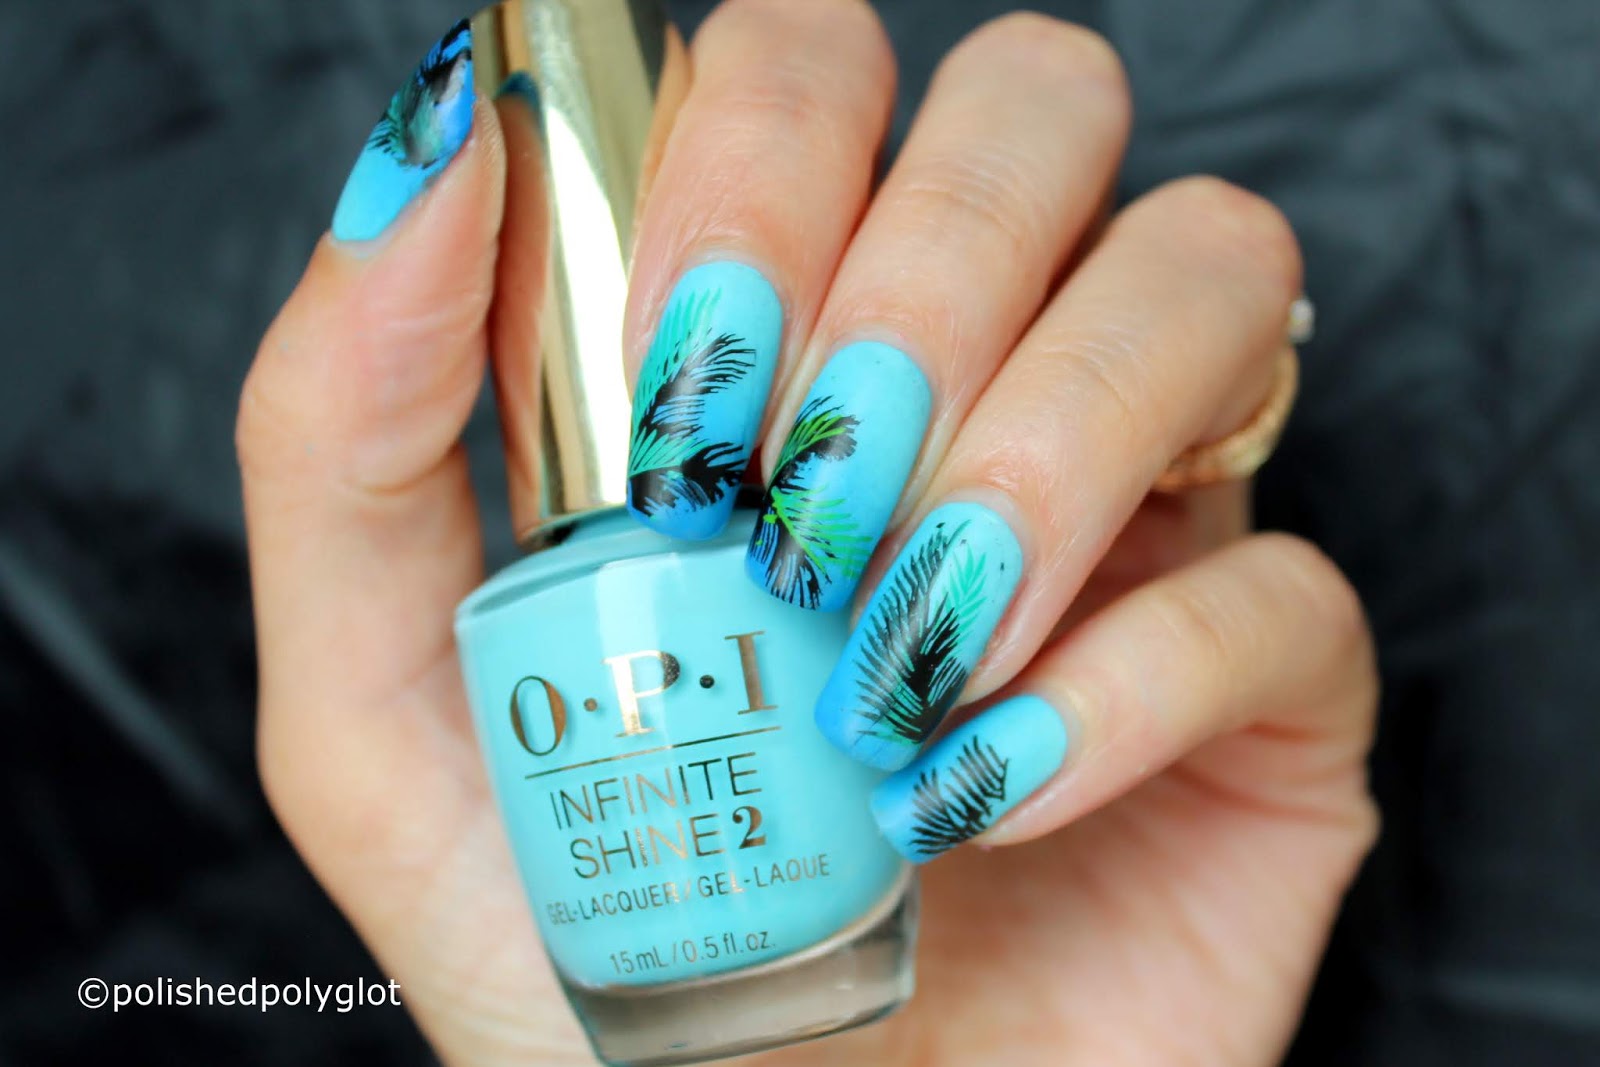 10 Fun and Festive Summer Vacation Nail Designs - wide 3